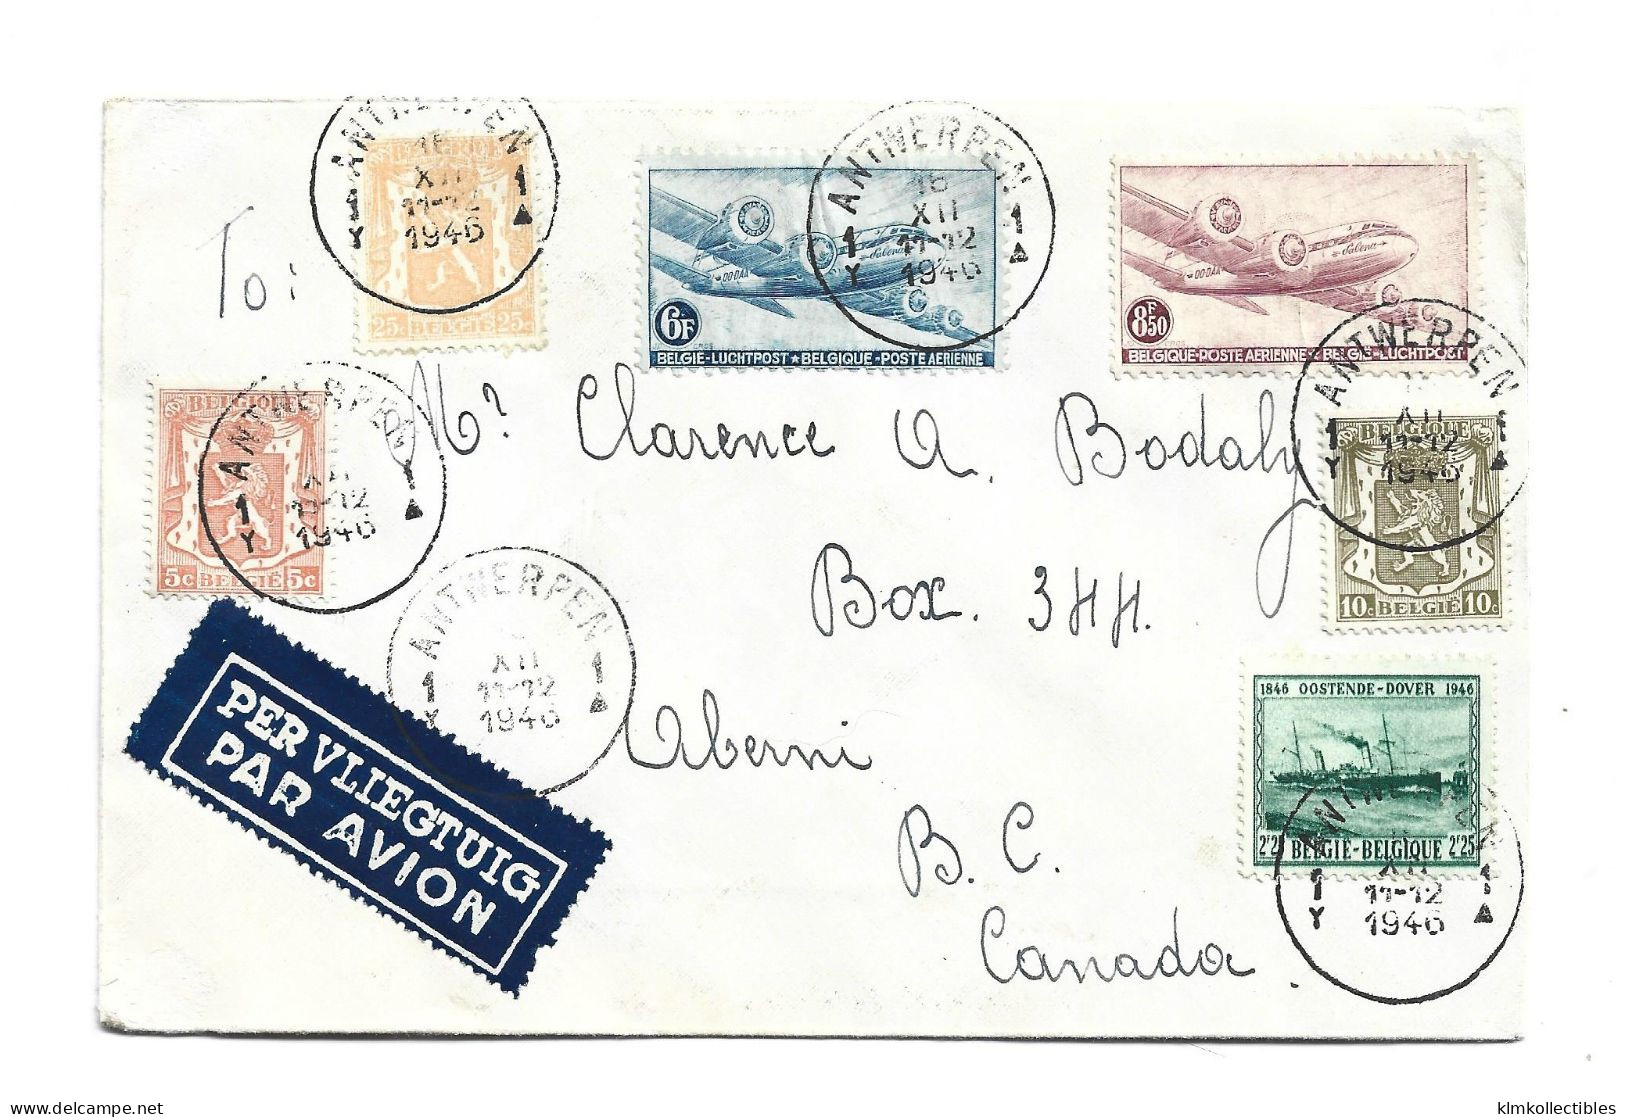 DENMARK DANMARK - 1946 AIRMAIL LUFTPOST COVER TO CANADA - Aéreo